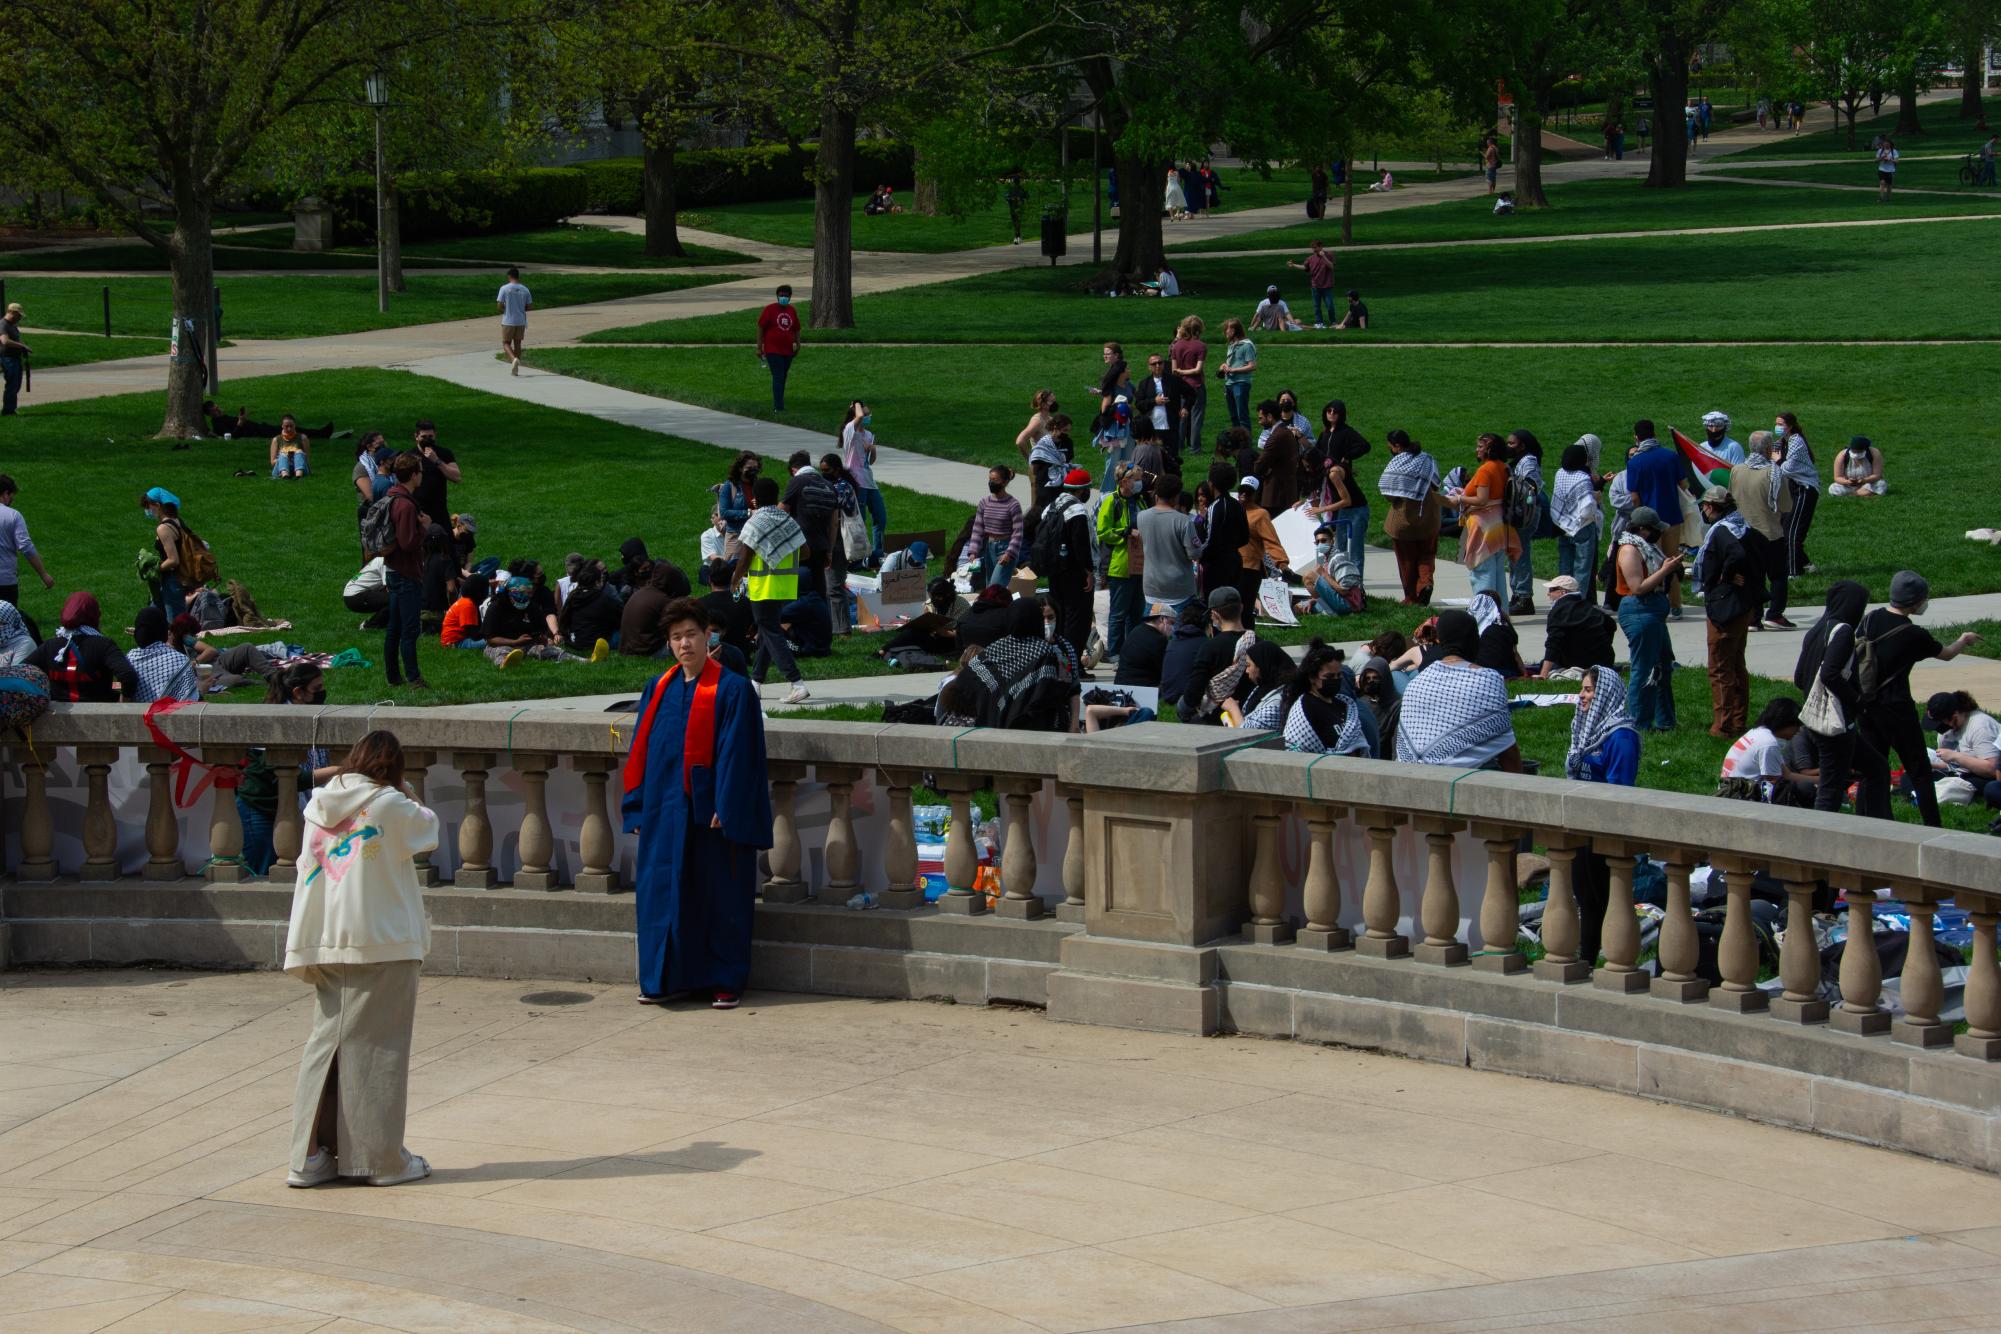 Students take graduation photos as the protesters assemble on the Main Quad in the background.